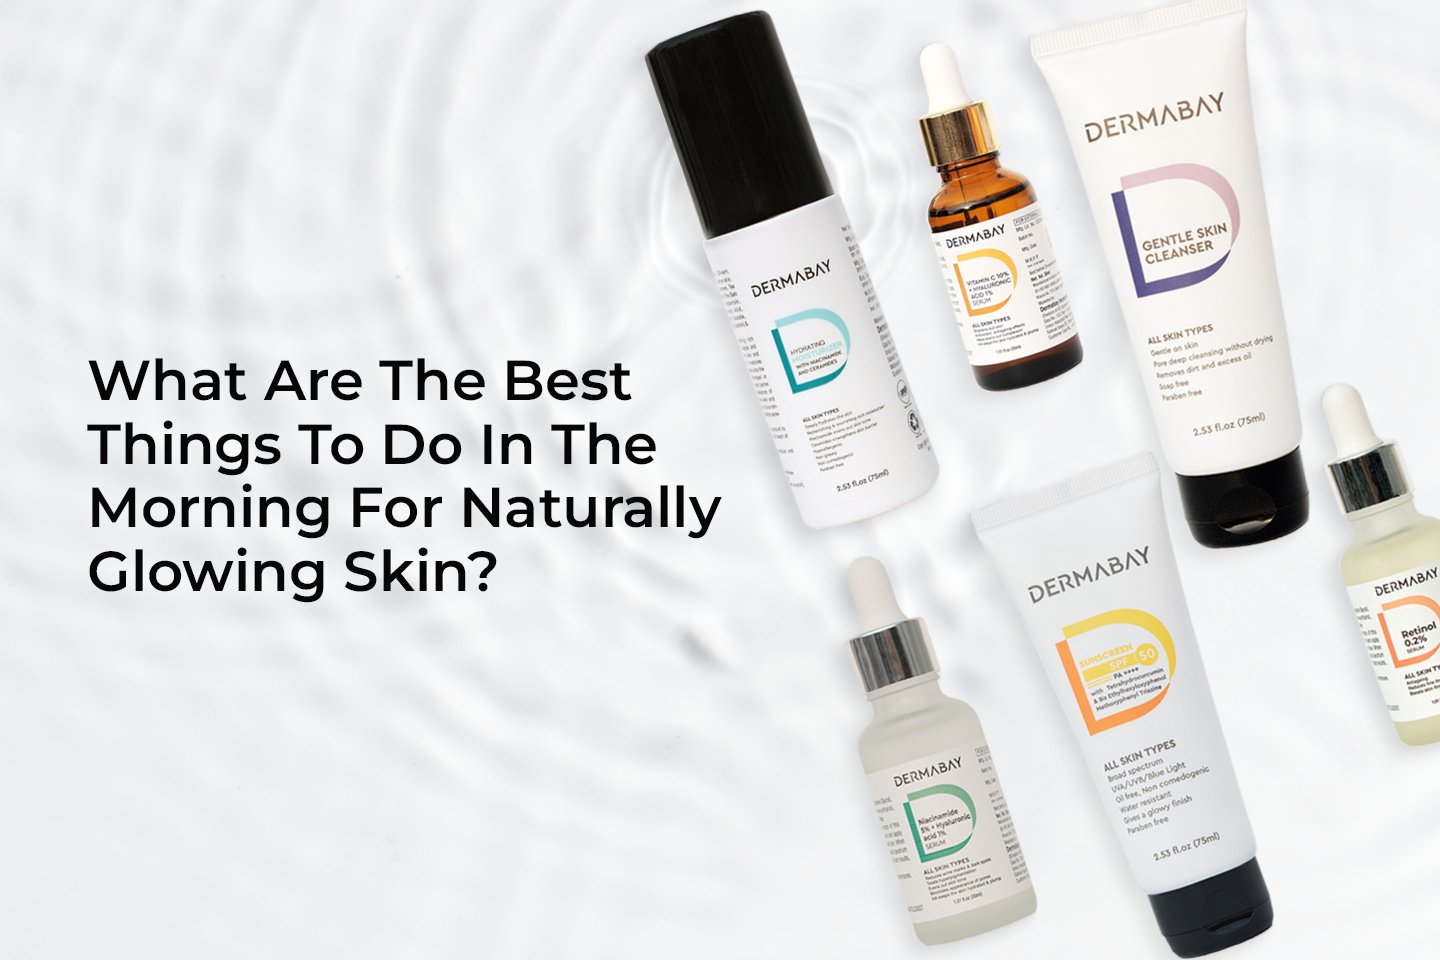 What Are The Best Things To Do In The Morning For Naturally Glowing Skin? - Dermabay